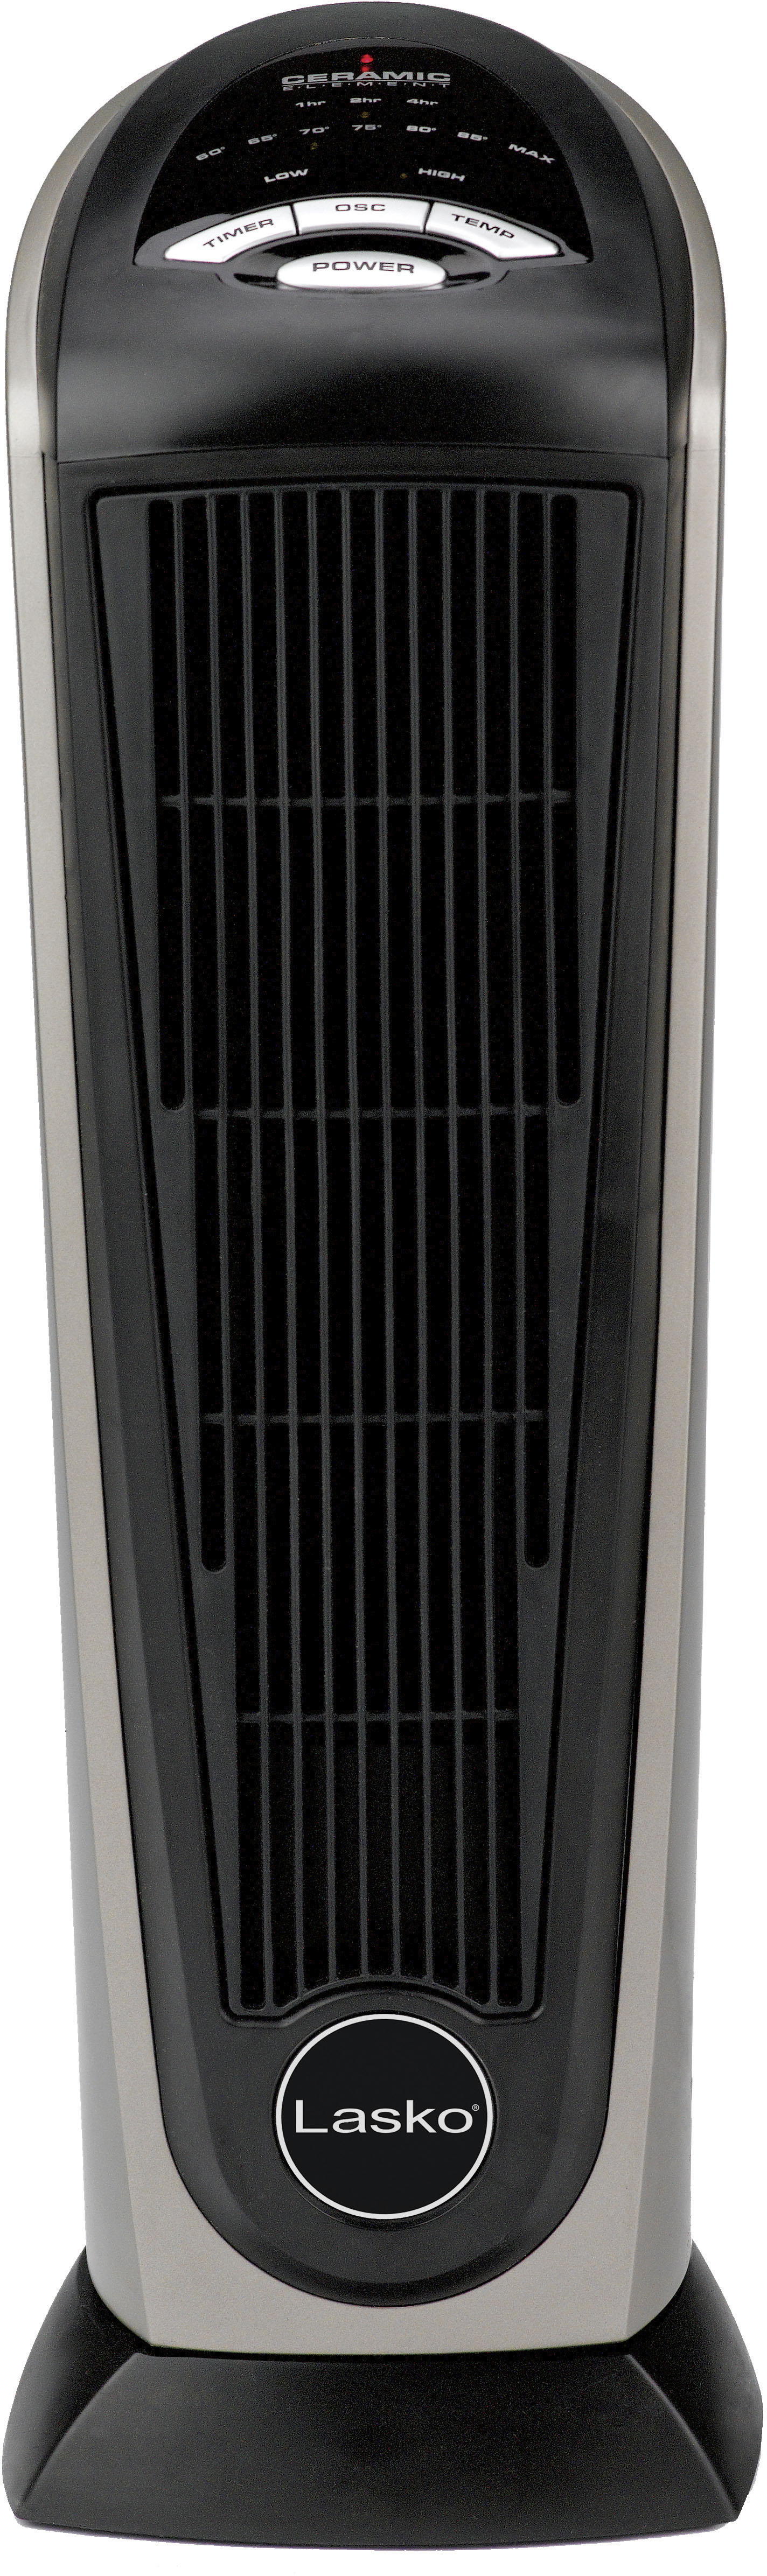 Lasko Portable Ceramic Tower Space Heater with Remote Control Black/Silver  751320 - Best Buy